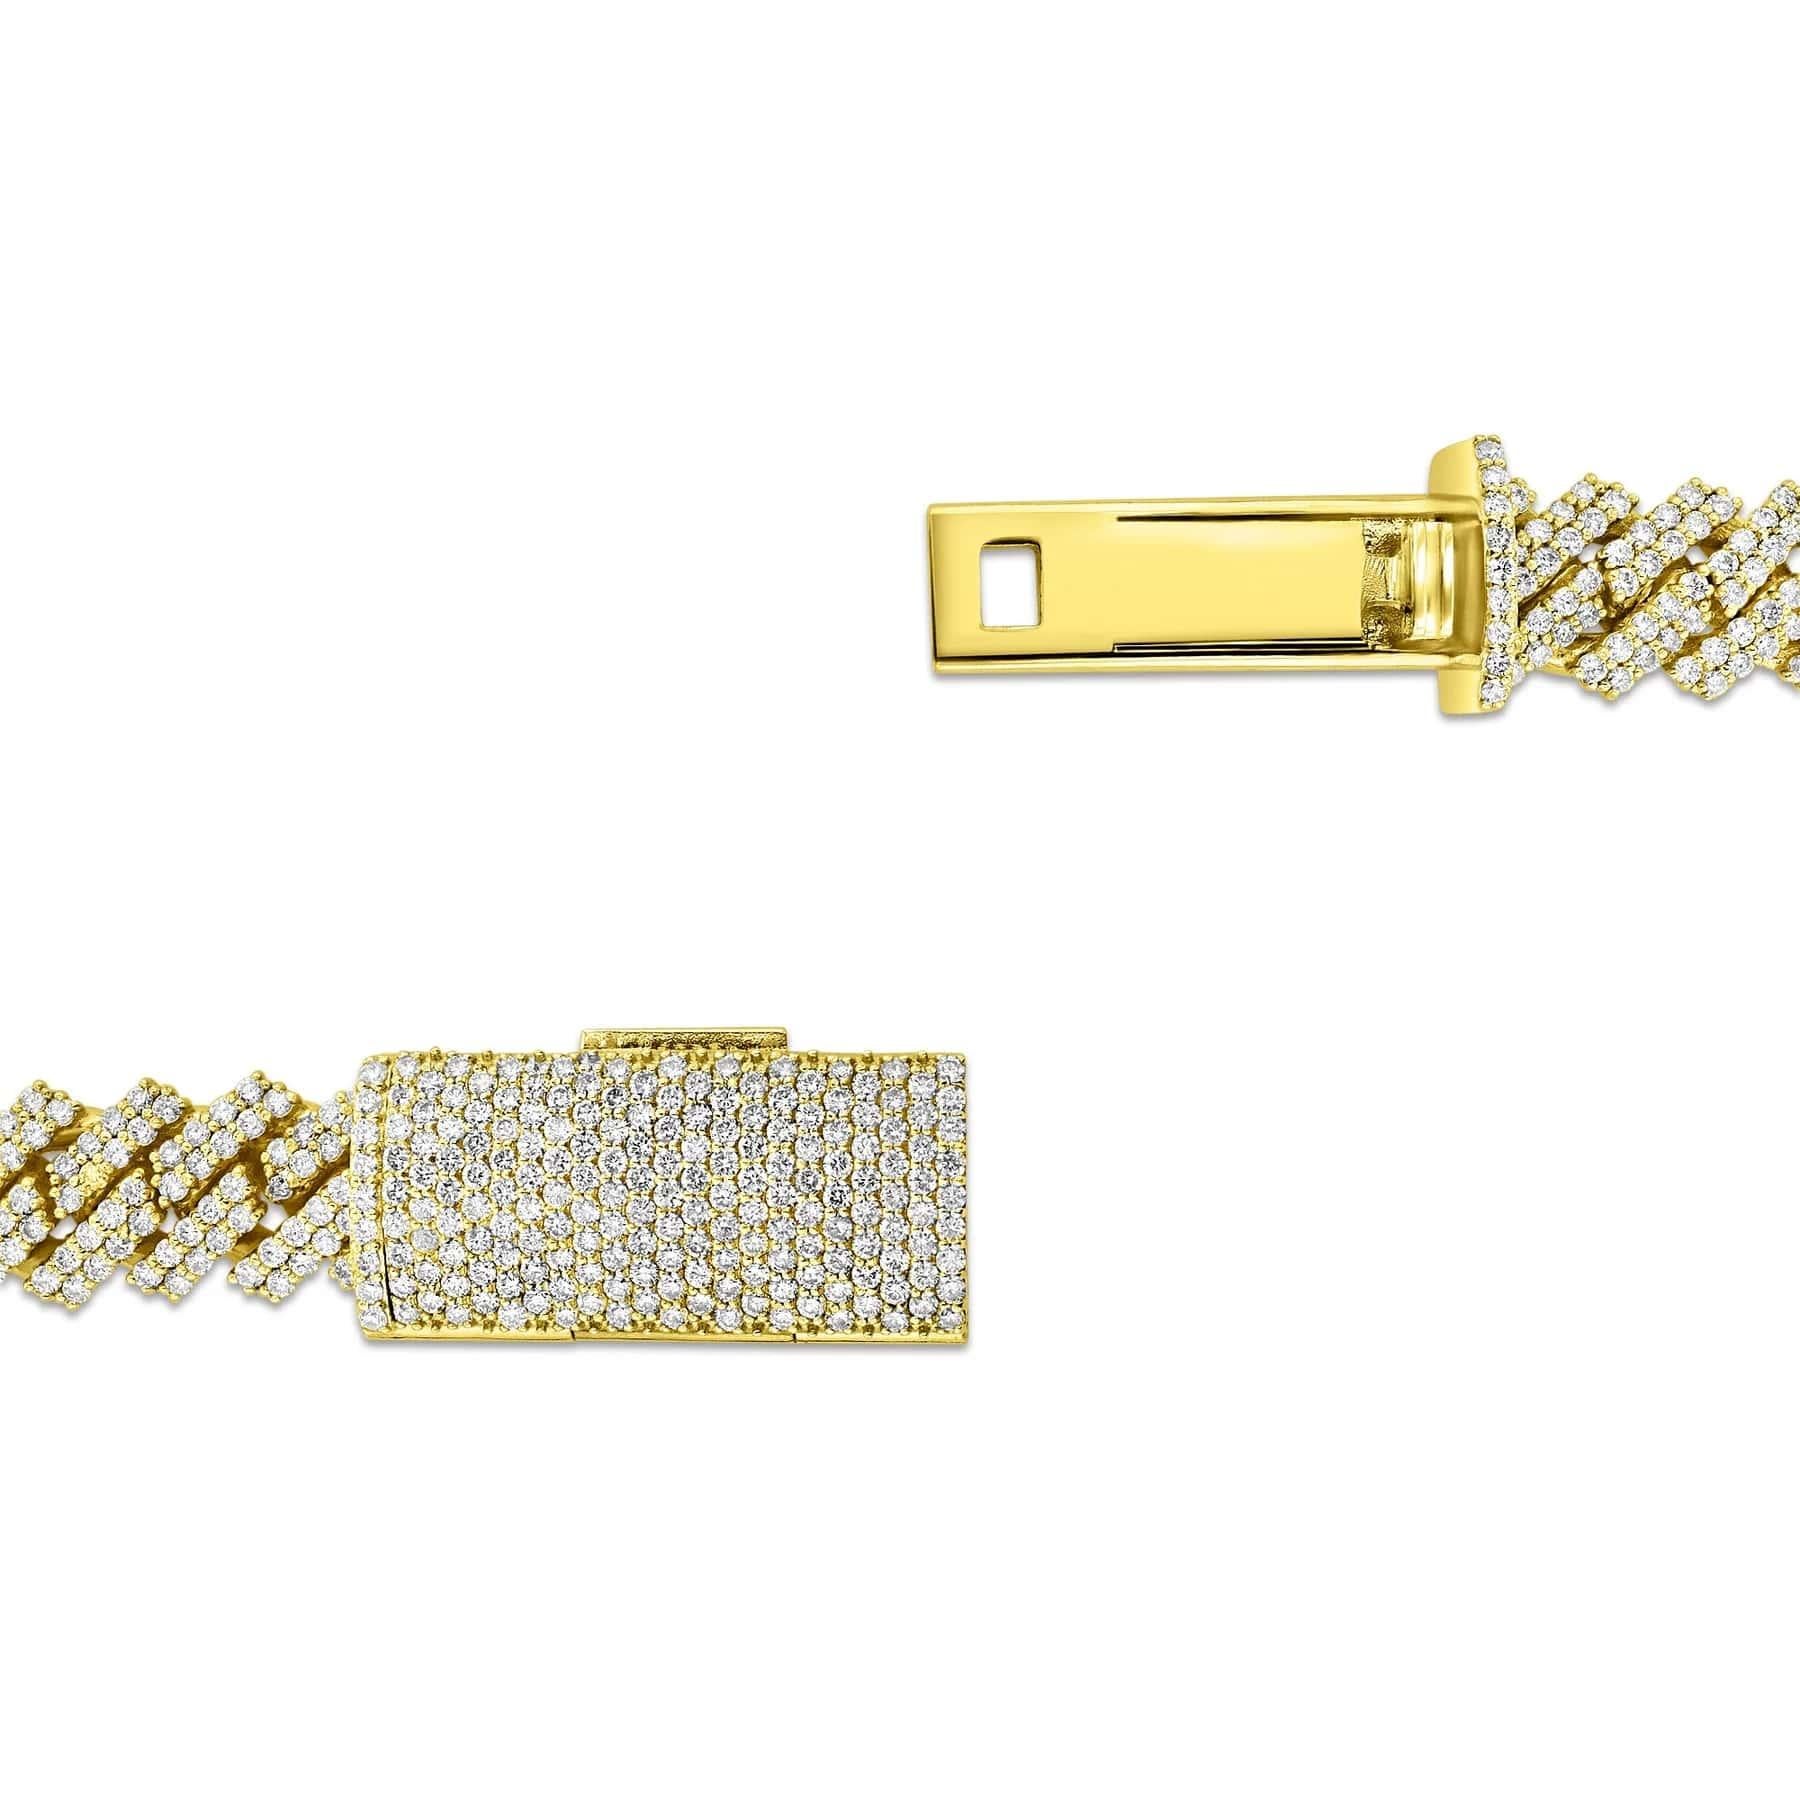 This diamond Cuban bracelet compliments any outfit and shines in every setting.

Bracelet Information 
Metal : 14k Gold
Color : Yellow Gold
Diamond Cut : Round 
Diamond Carats : 10ttcw
Diamond Clarity : VS-SI
Diamond Color : F-G
Gold Weight : 39-59